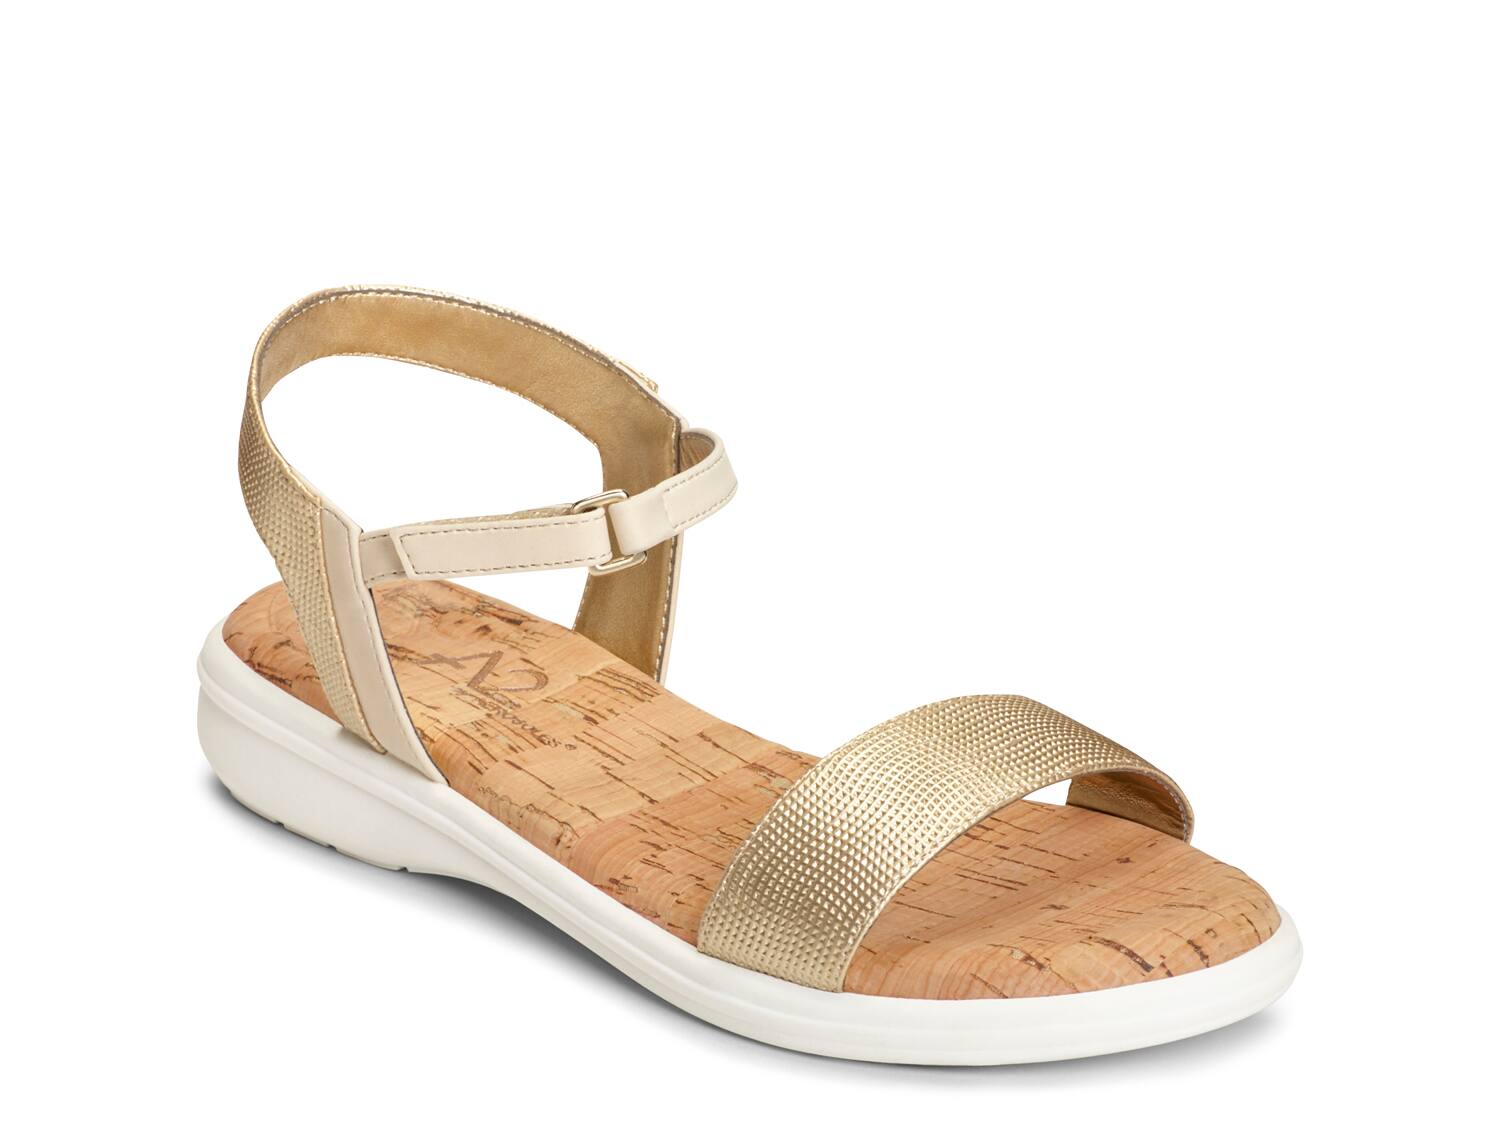 A2 by Aerosoles Great Night Sandal - Free Shipping | DSW